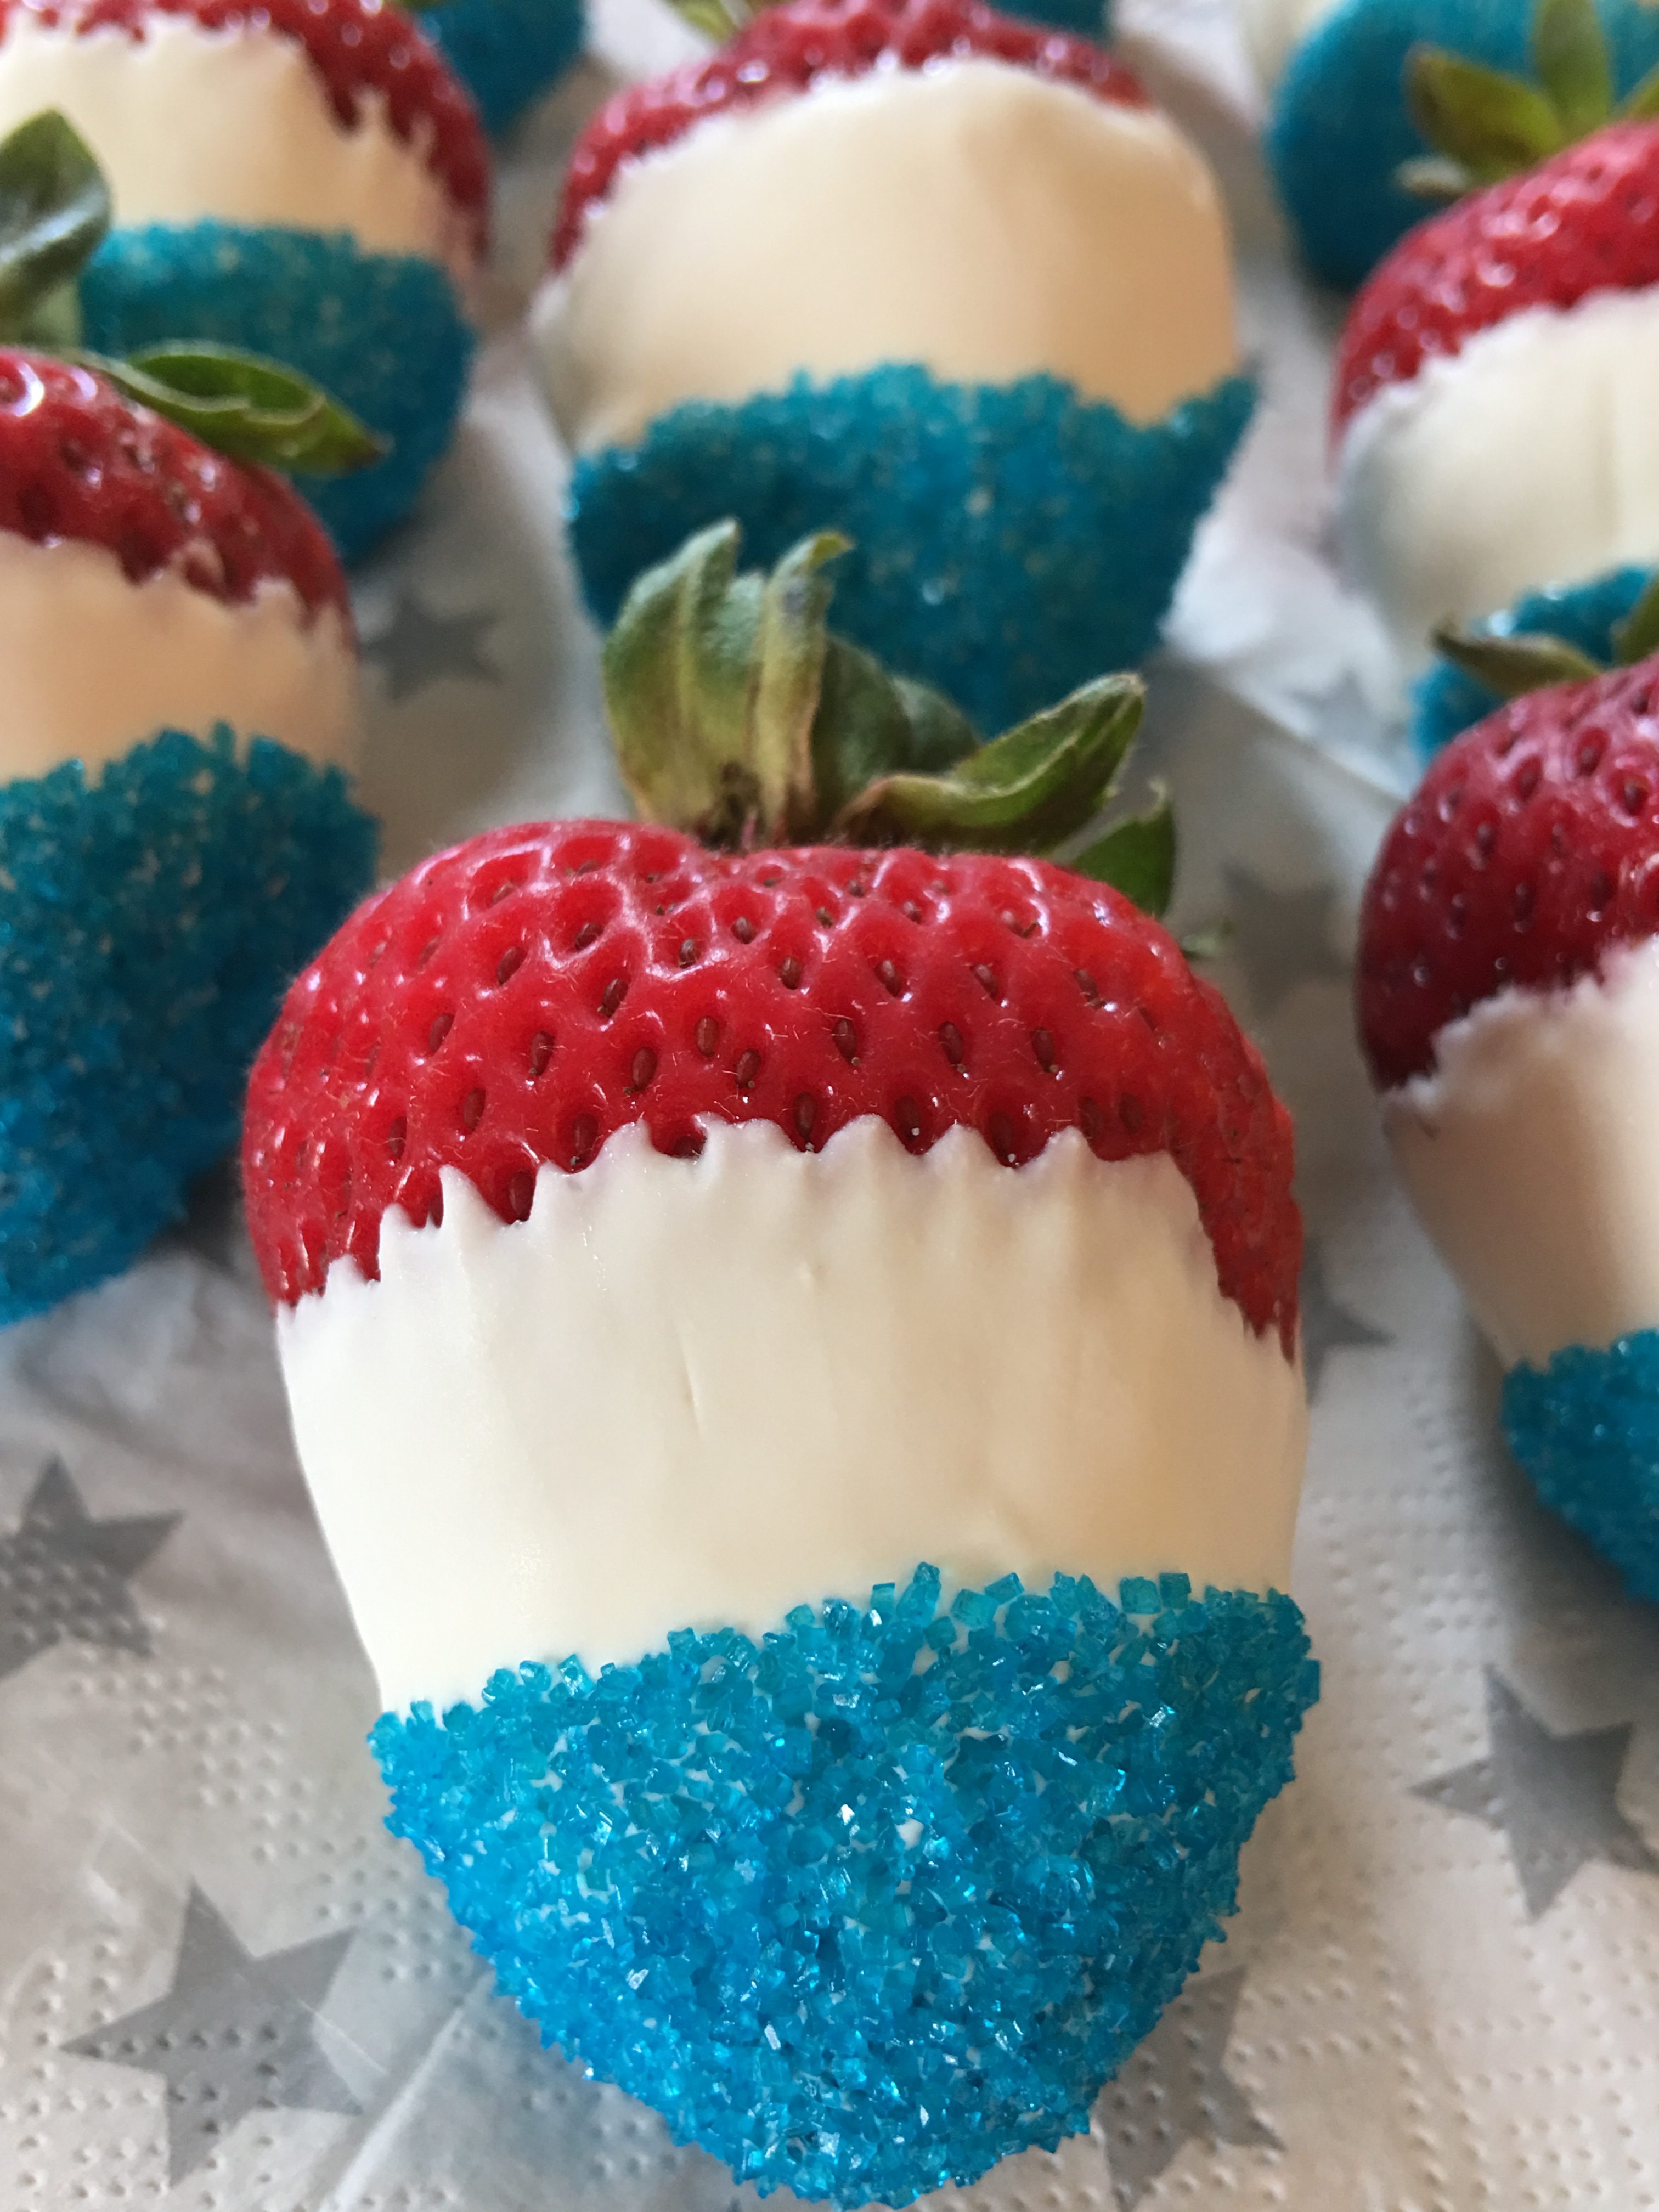 Festive 4th of July Chocolate Covered Strawberries